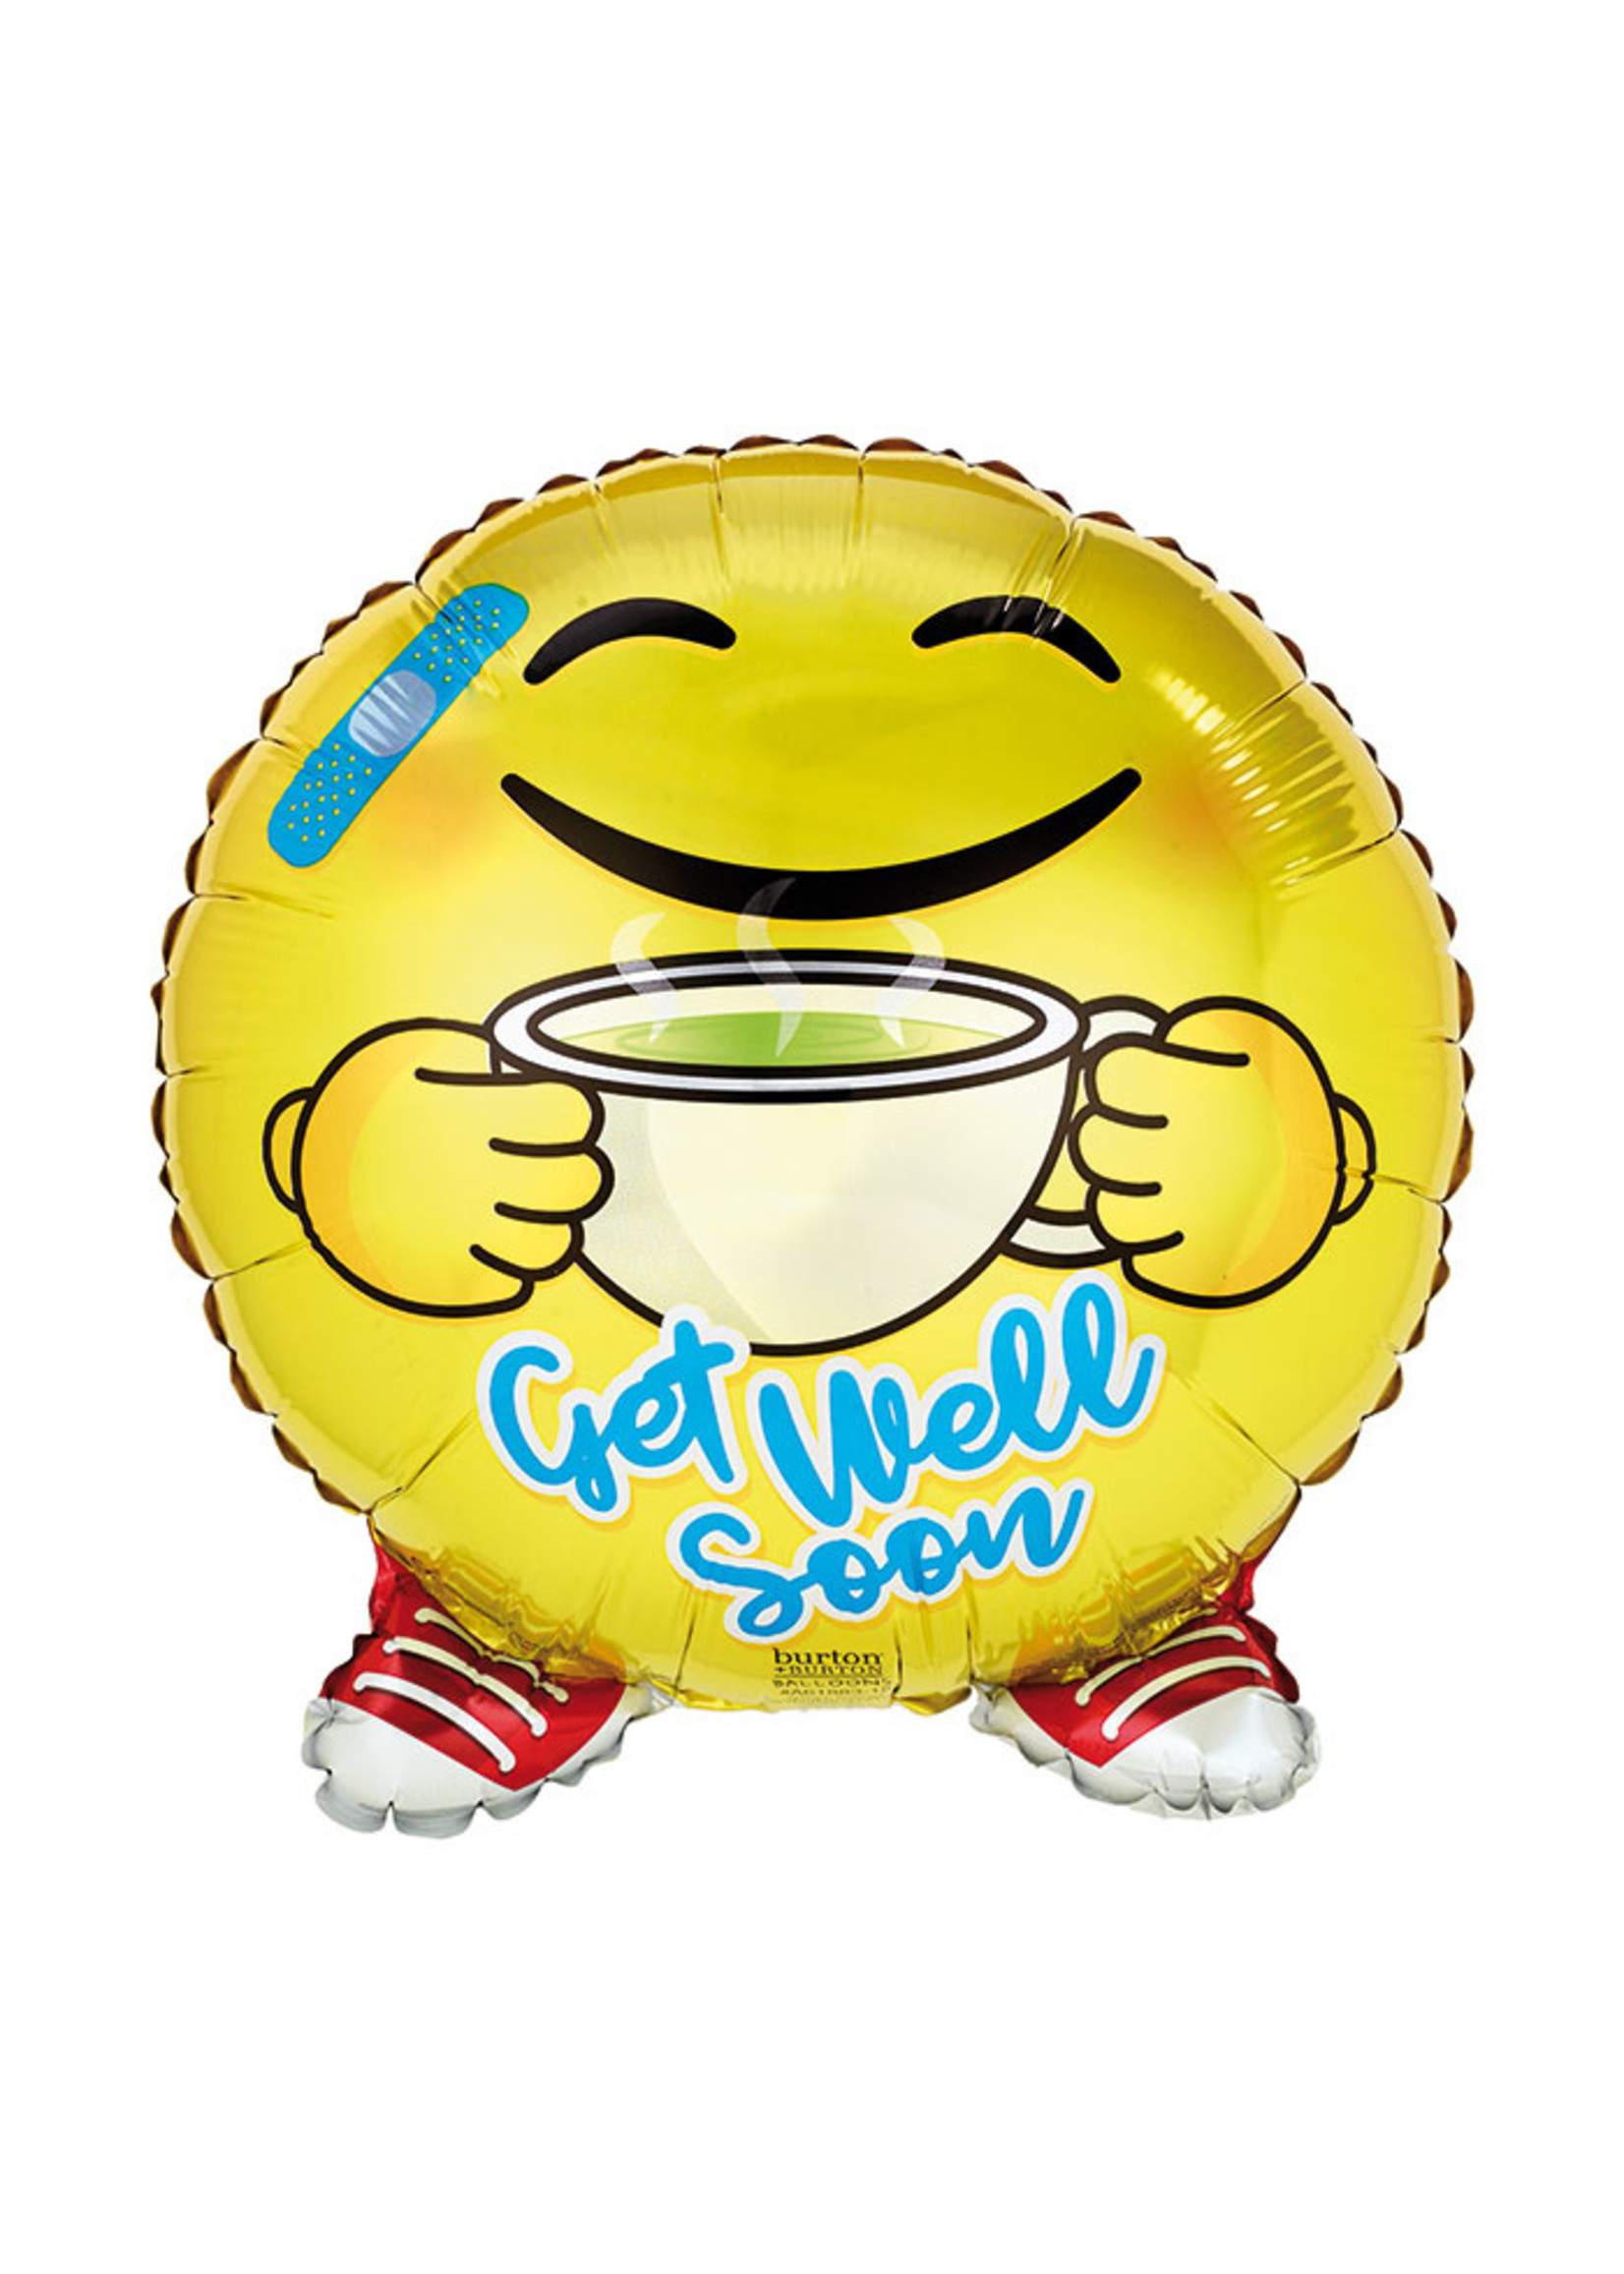 Get Well Soon emoji with cup